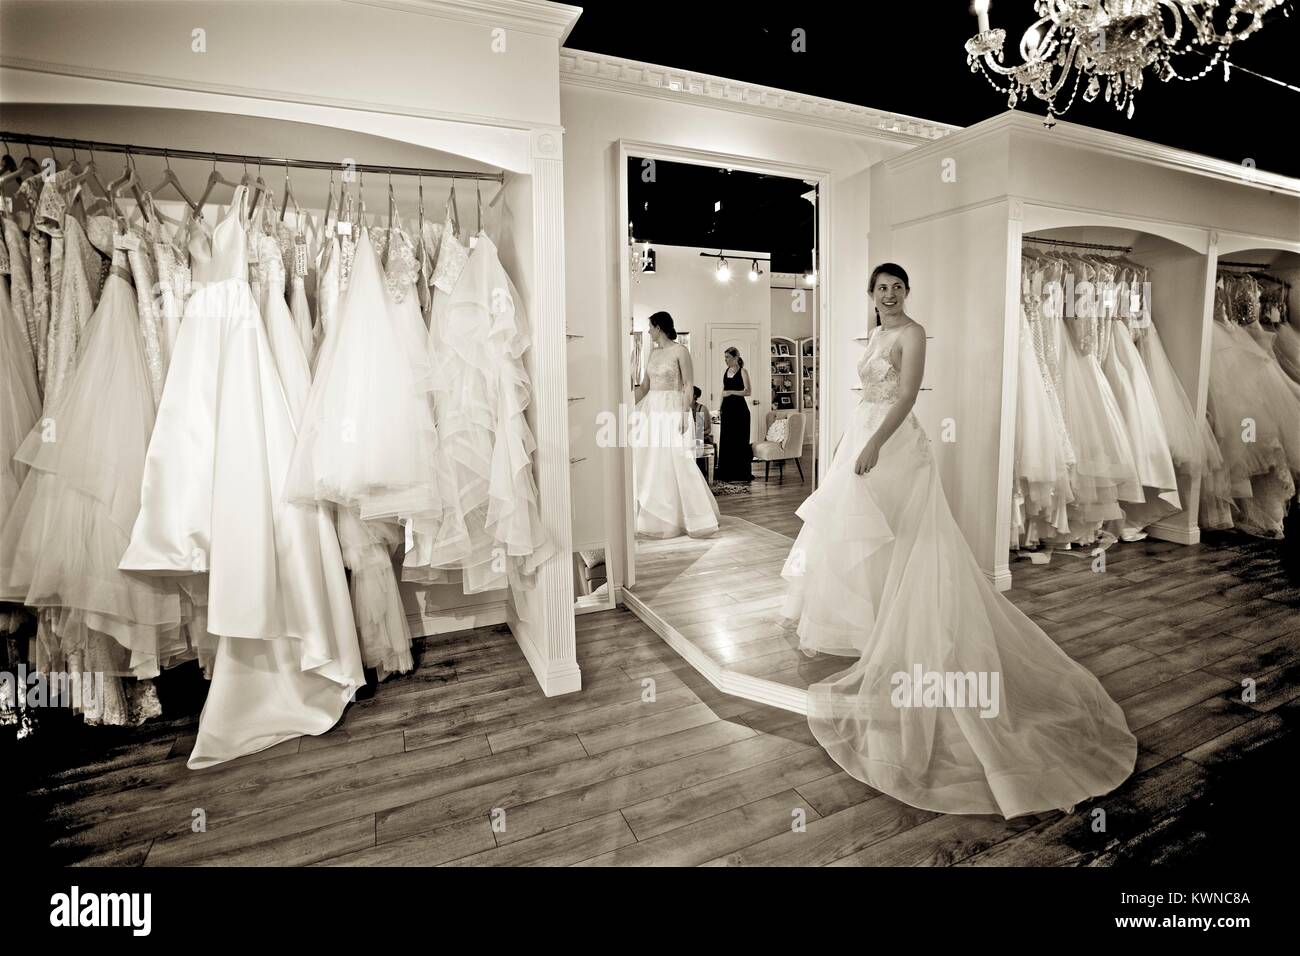 Bridal gown fitting at a bridal boutique Stock Photo